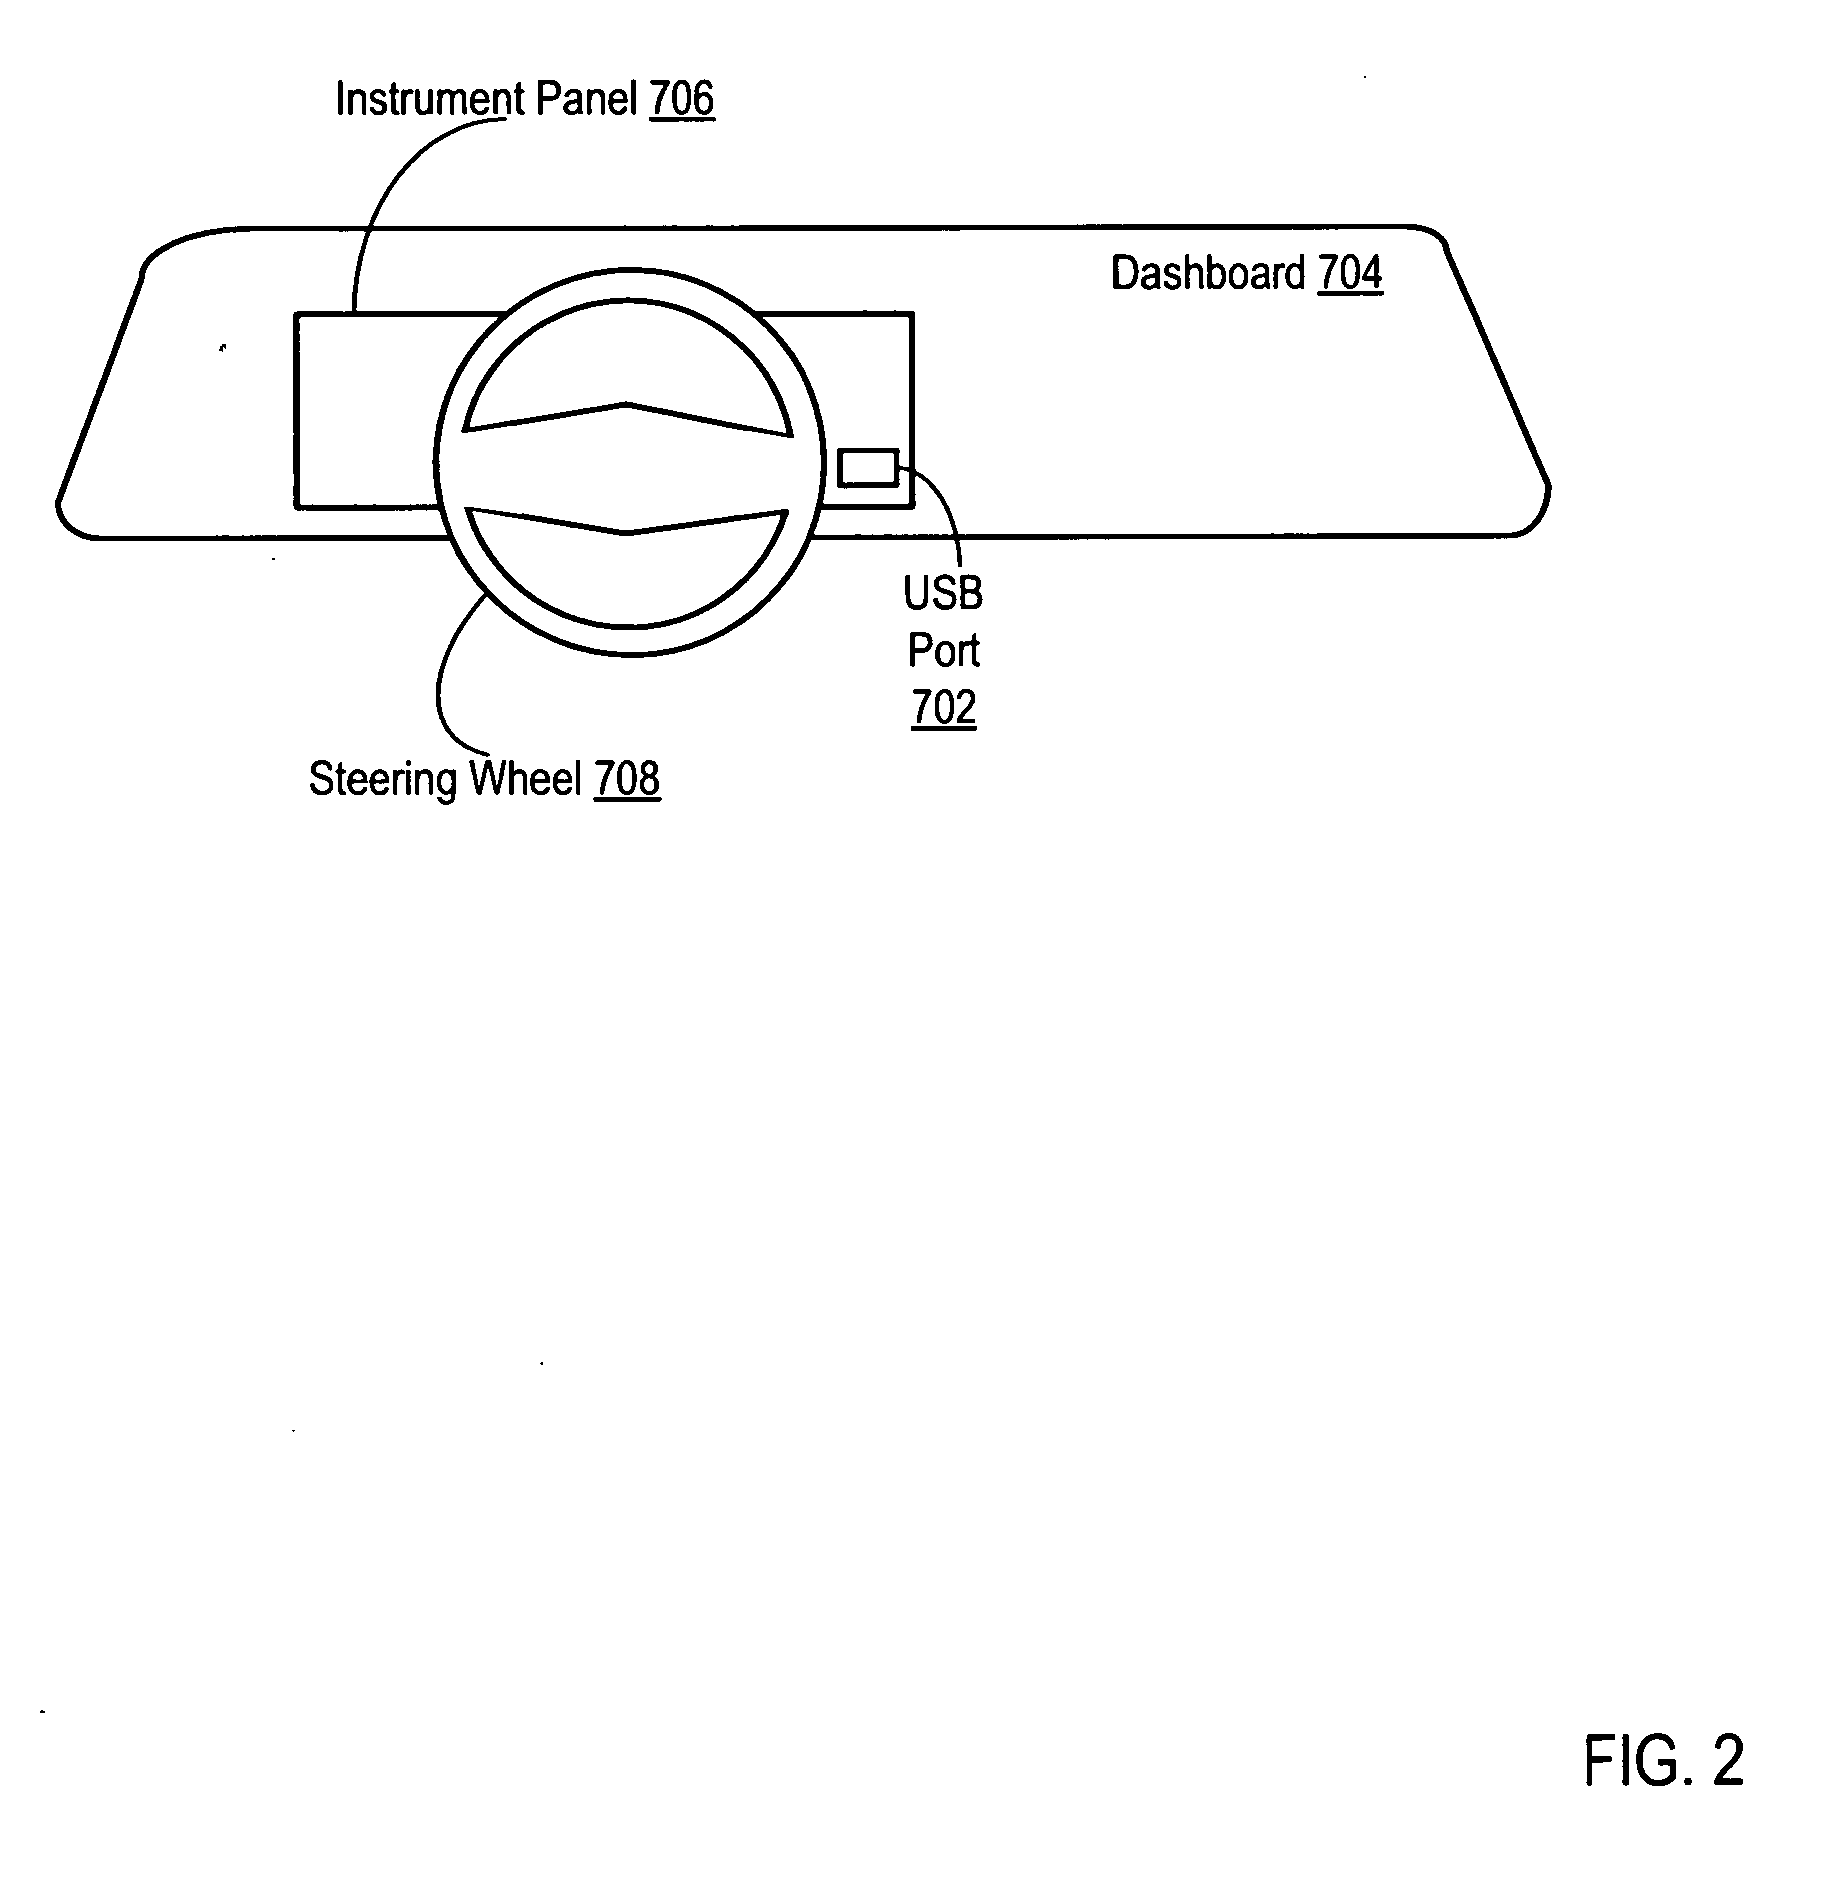 Customizing the layout of the instrument panel of a motorized vehicle